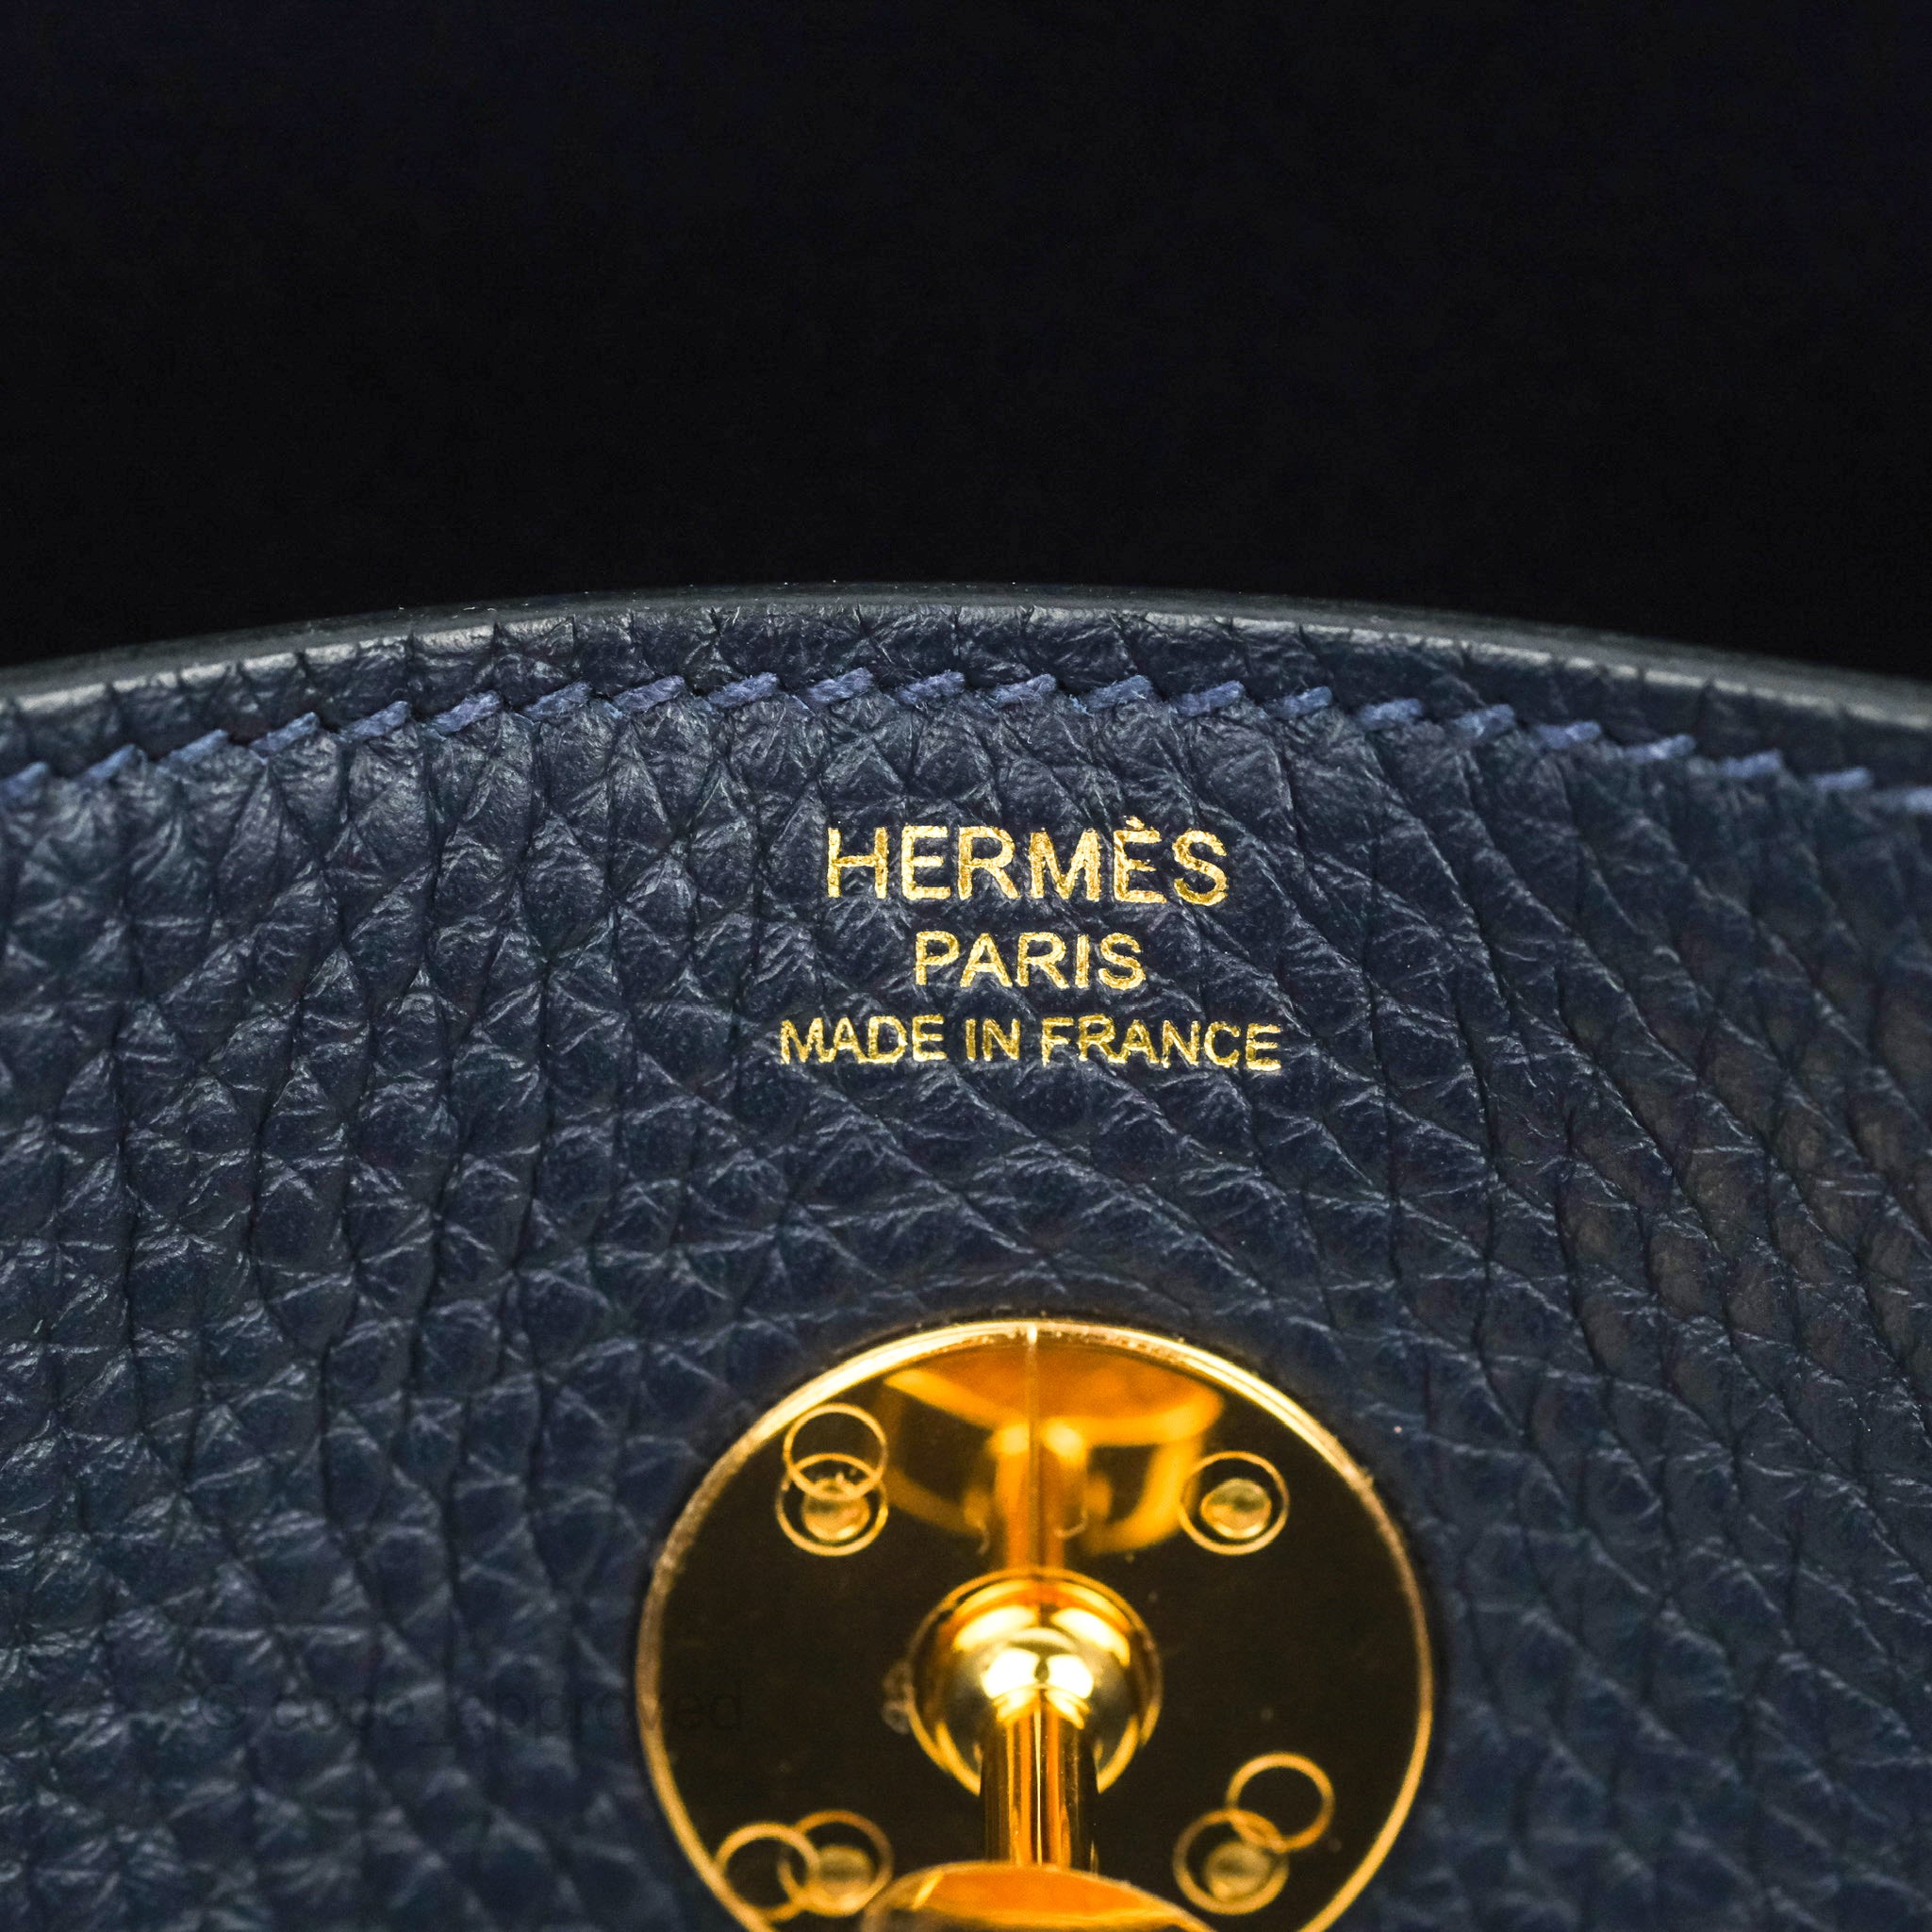 New Hermes Lindy 26 Clemence 26 Bag Phw Blue orage / cky7 - contact us for  details. #lindy26blueorage #hermeslindy26blueorage #lindy26y7 #lindy26blue, By Italy Station 意大利站